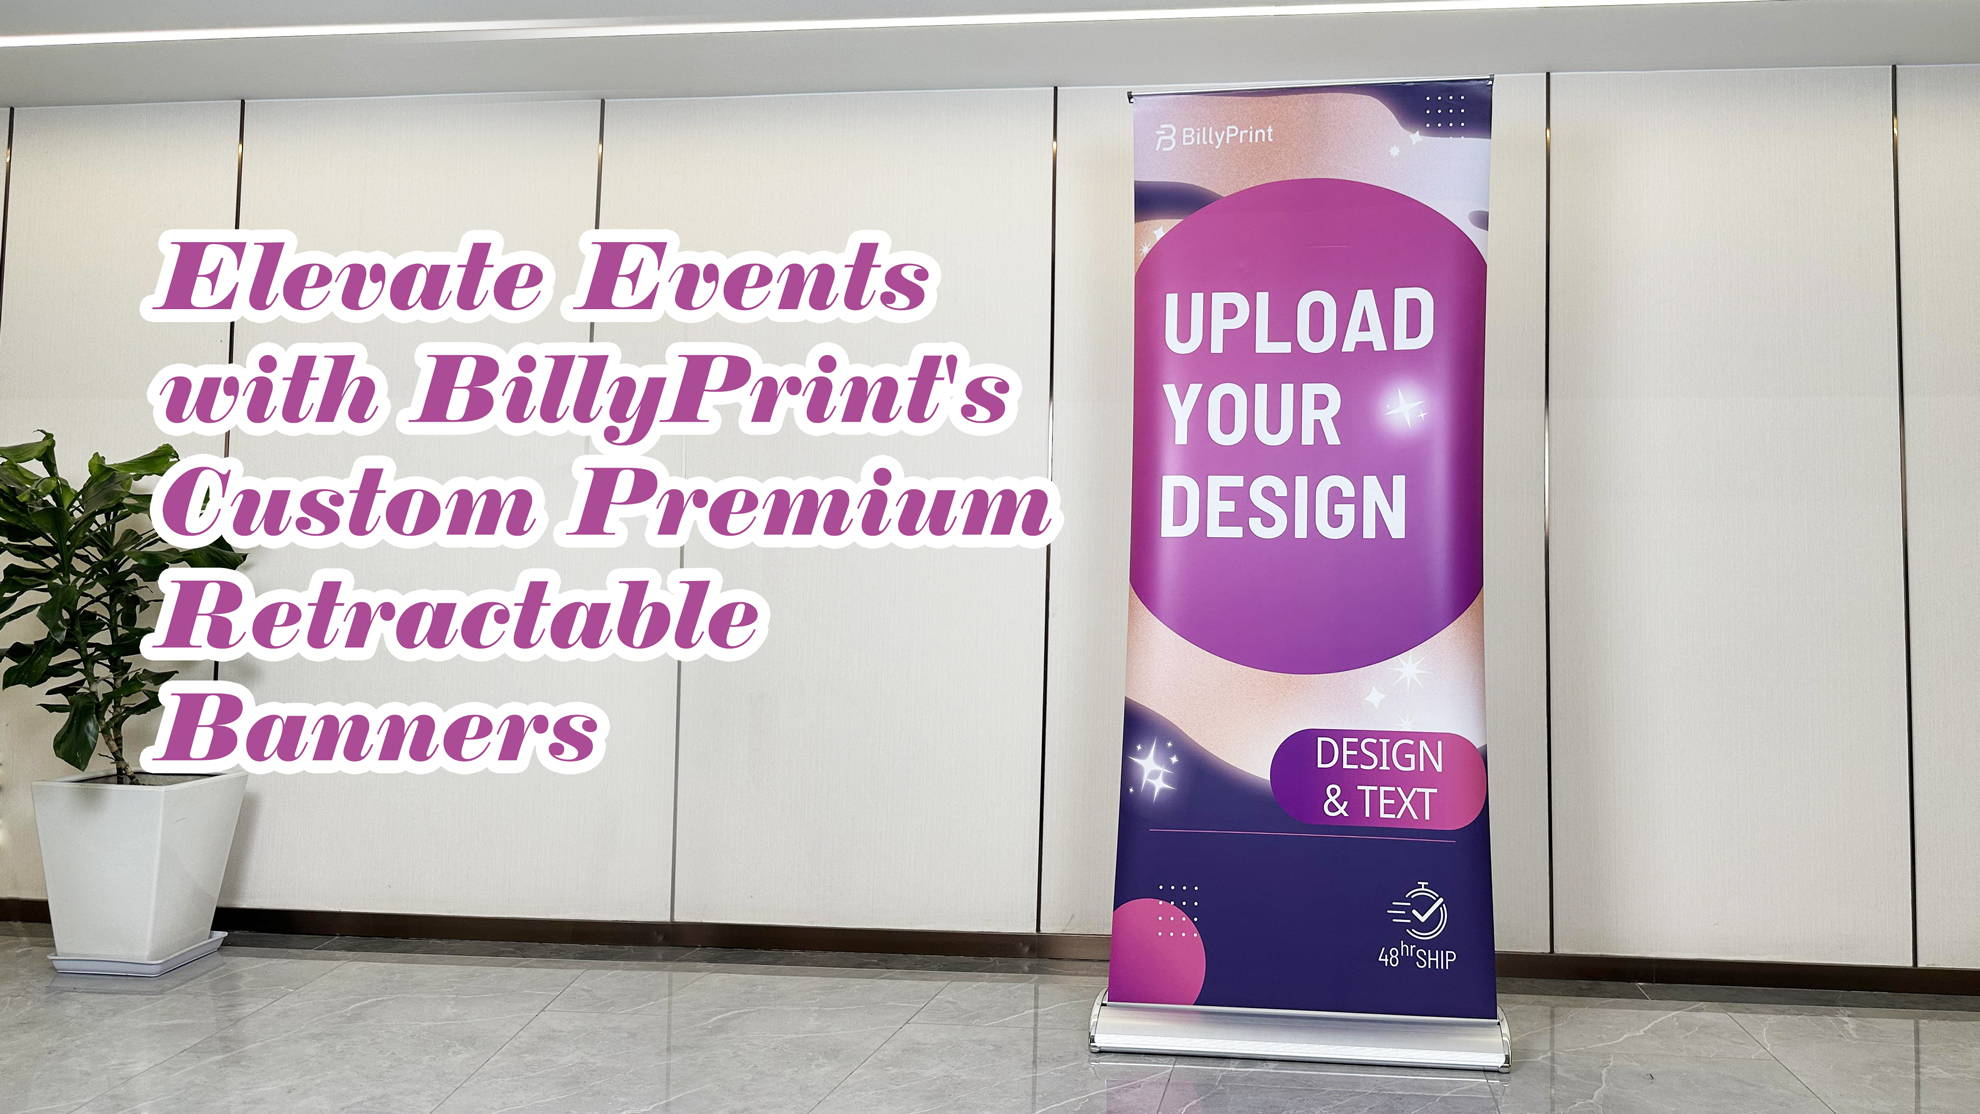 BillyPrint Custom Premium Retractable Banner displayed next to a promotional wall at an event.